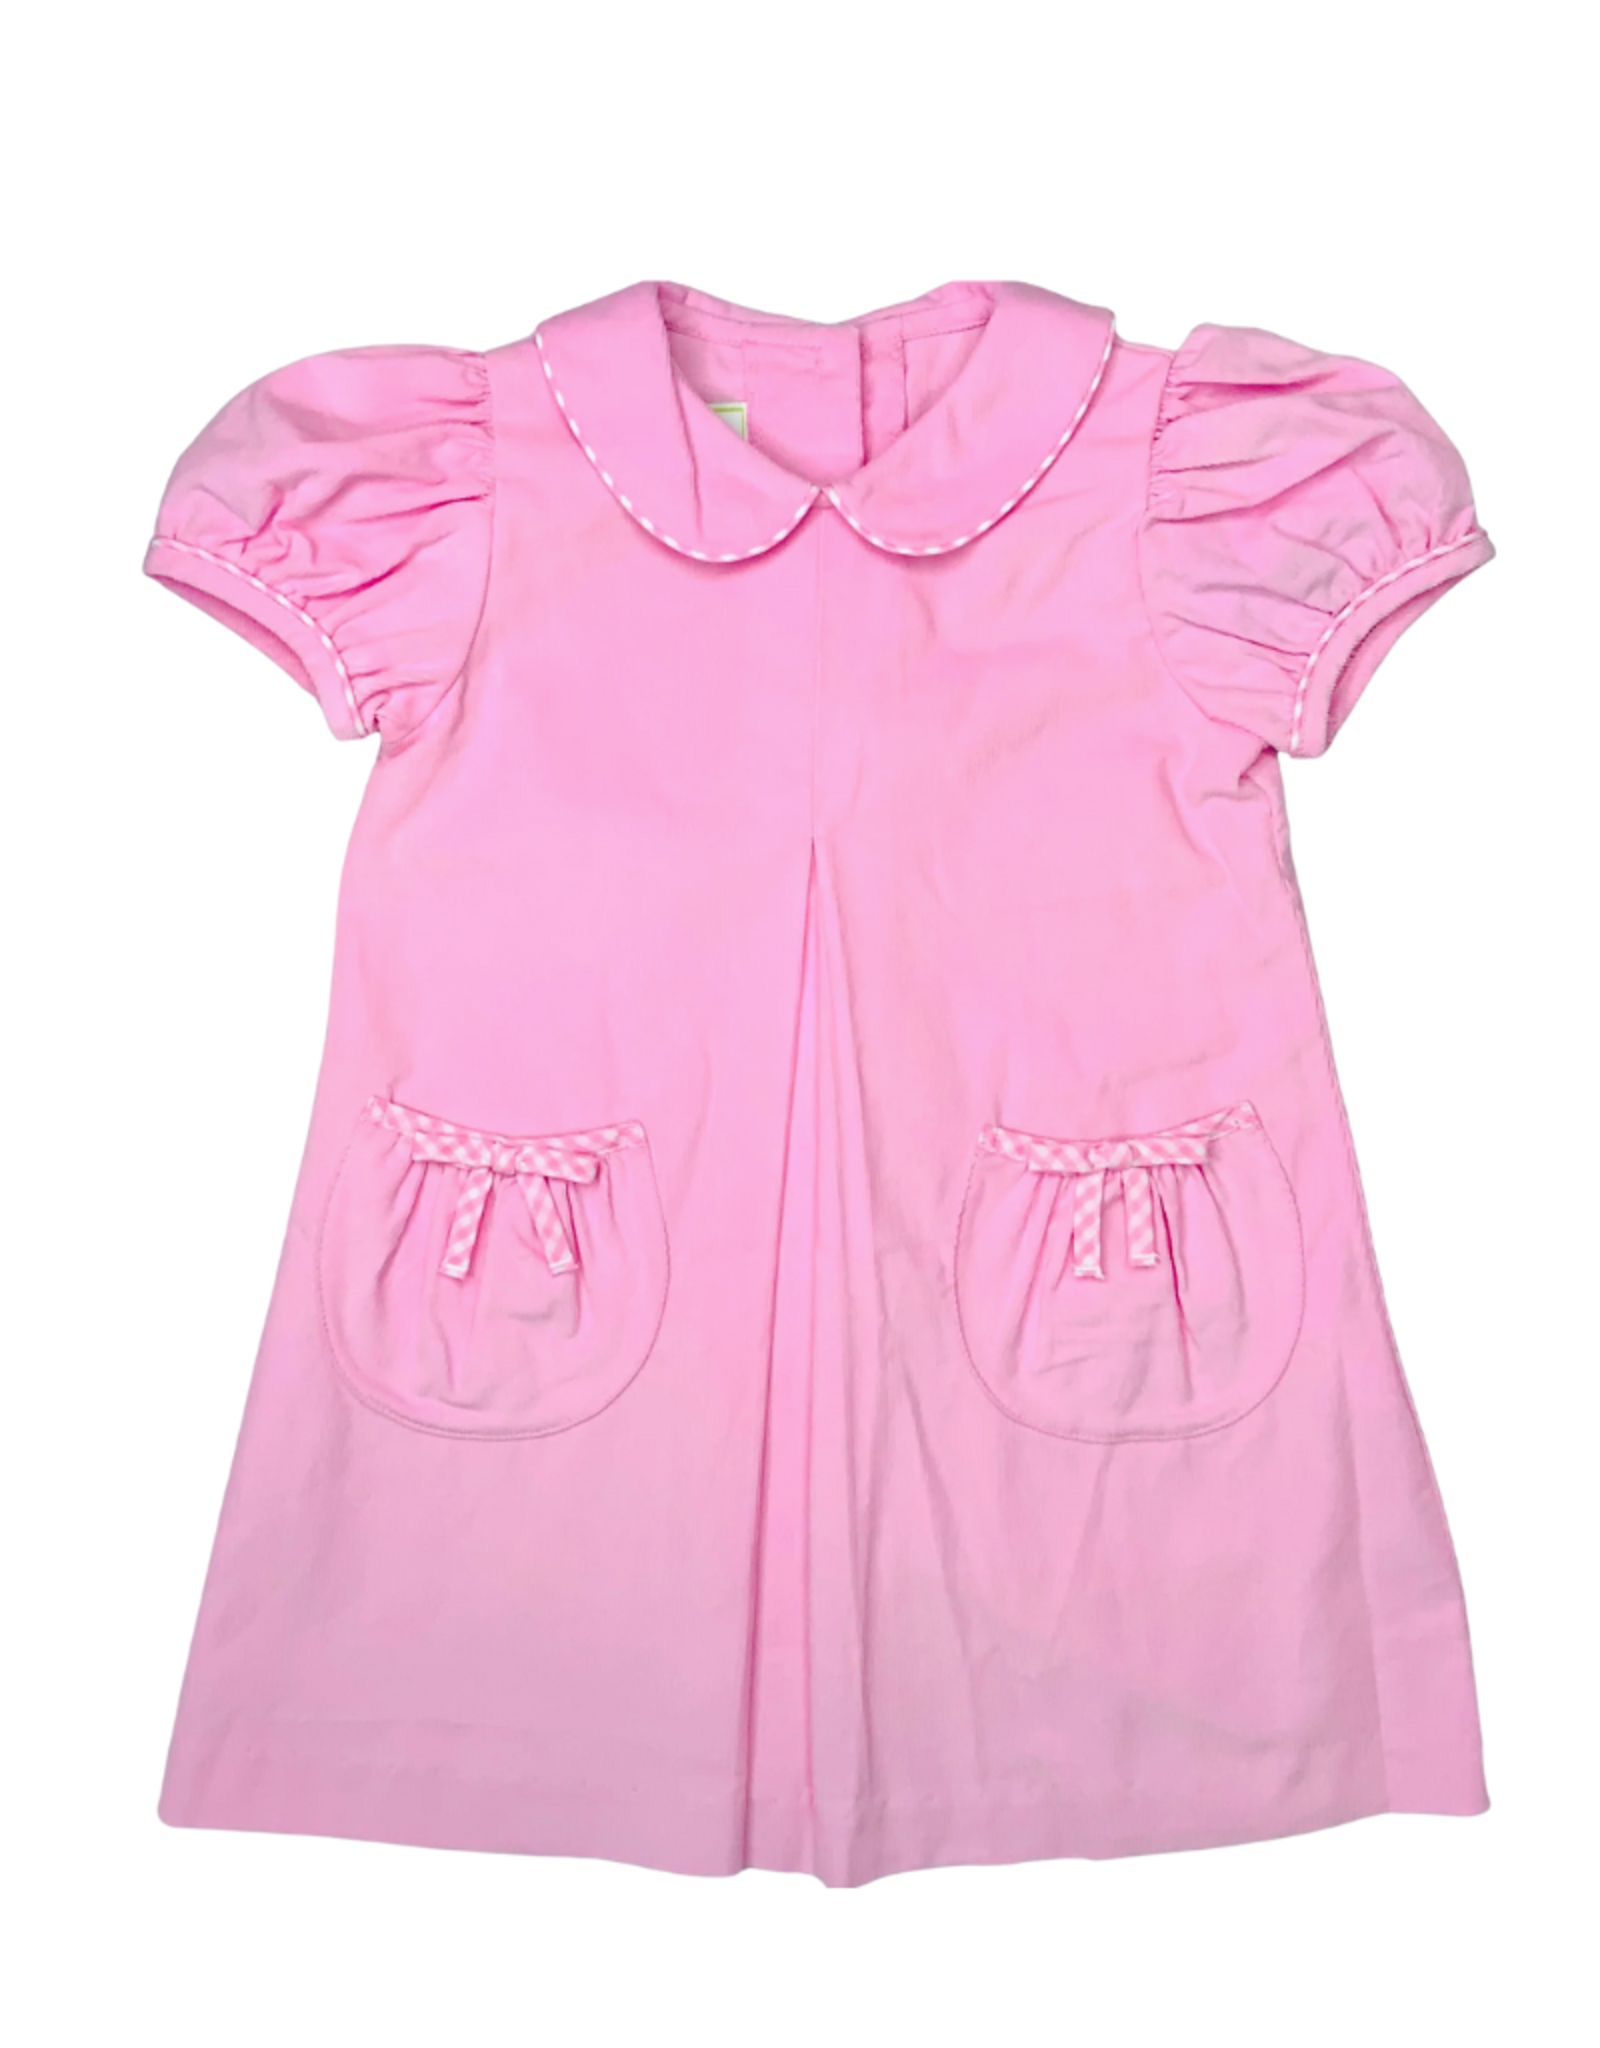 Zuccini Cicely Dress Short Sleeve, Pink Corduroy